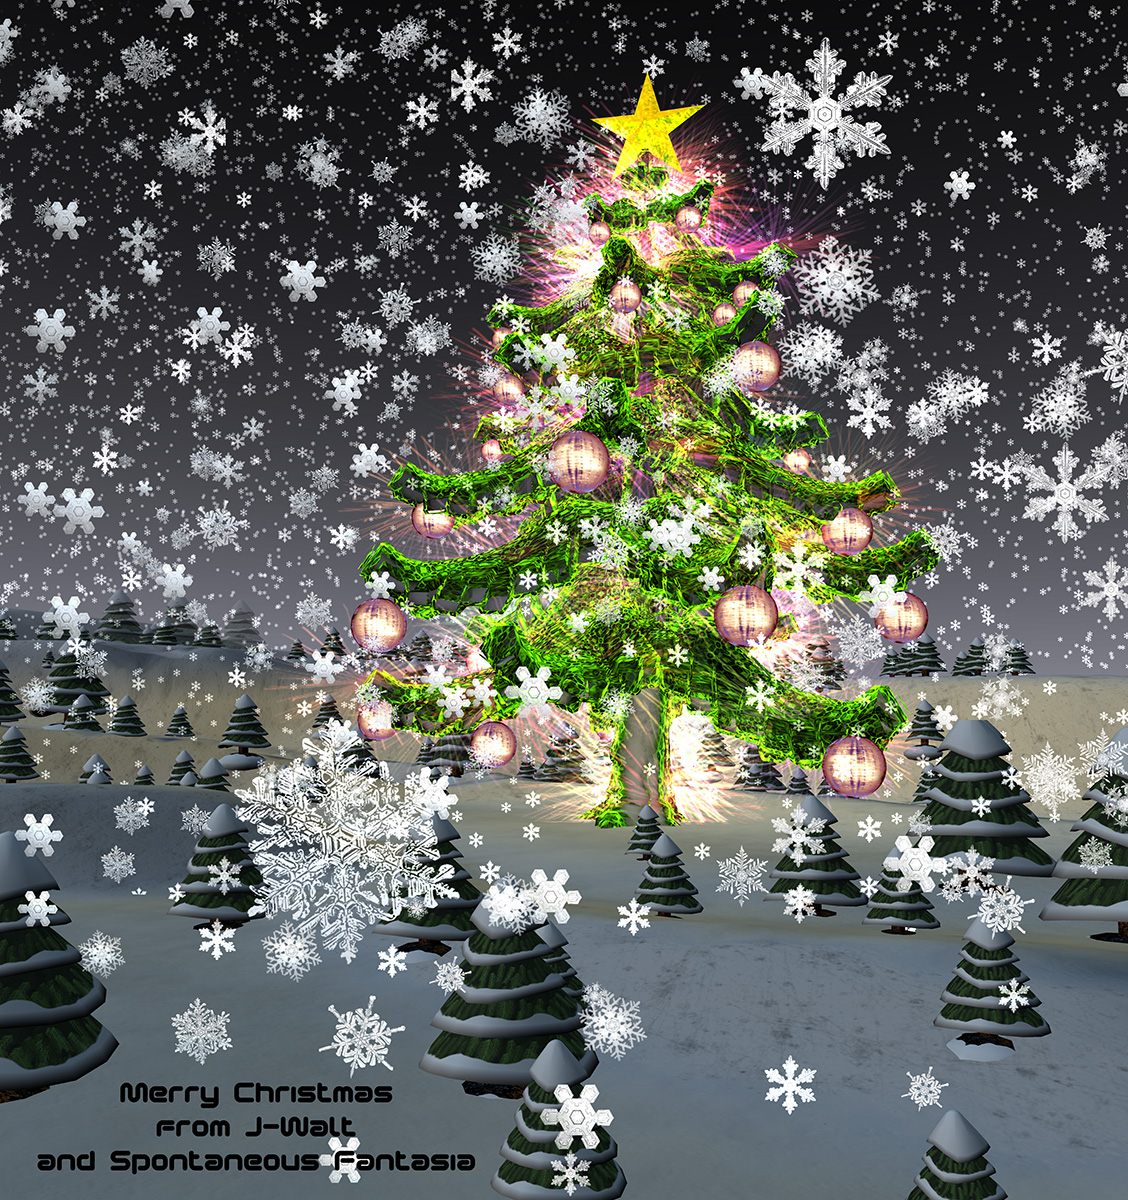 Merry Christmas and a Happy 2011 to all! - Spontaneous Fantasia